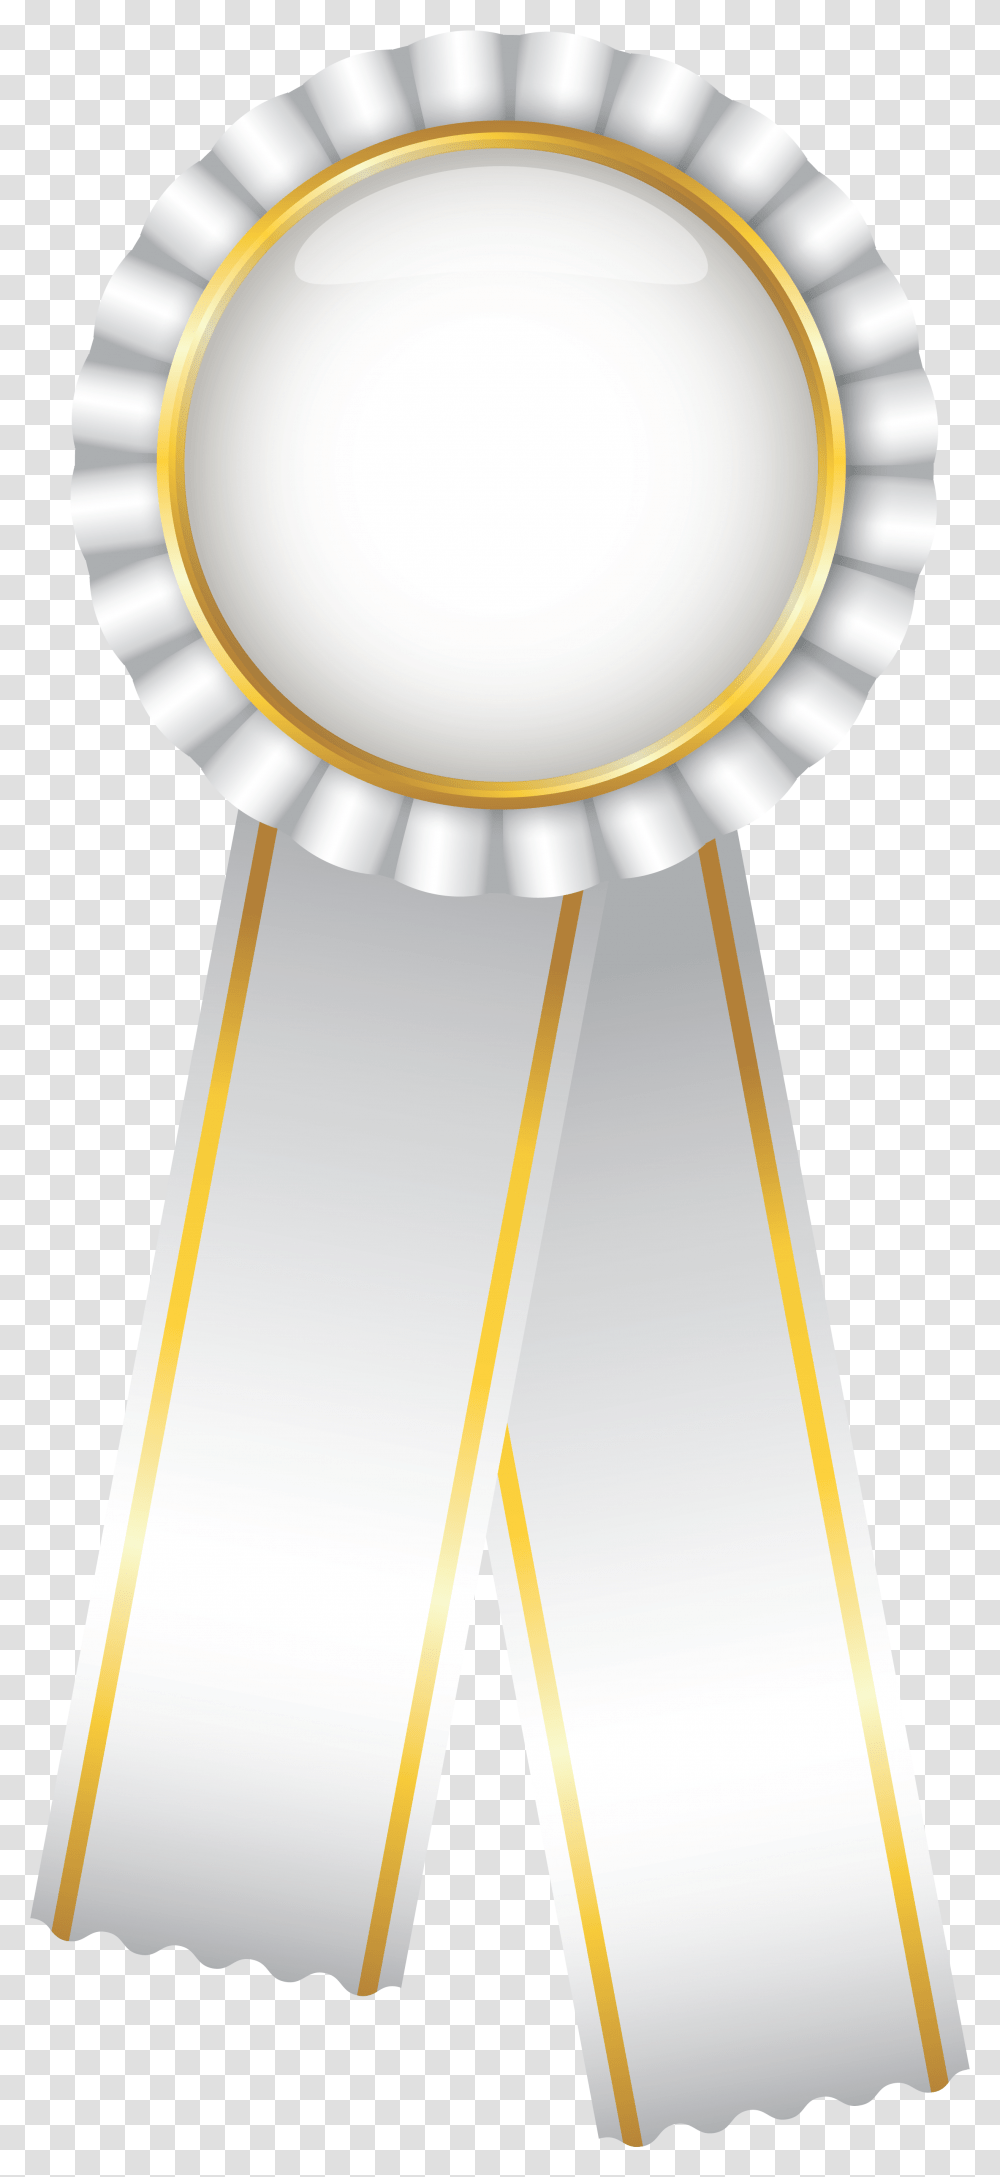 Download Hd White Lace Ribbon Ribbon, Lamp, Trophy, Gold, Gold Medal Transparent Png